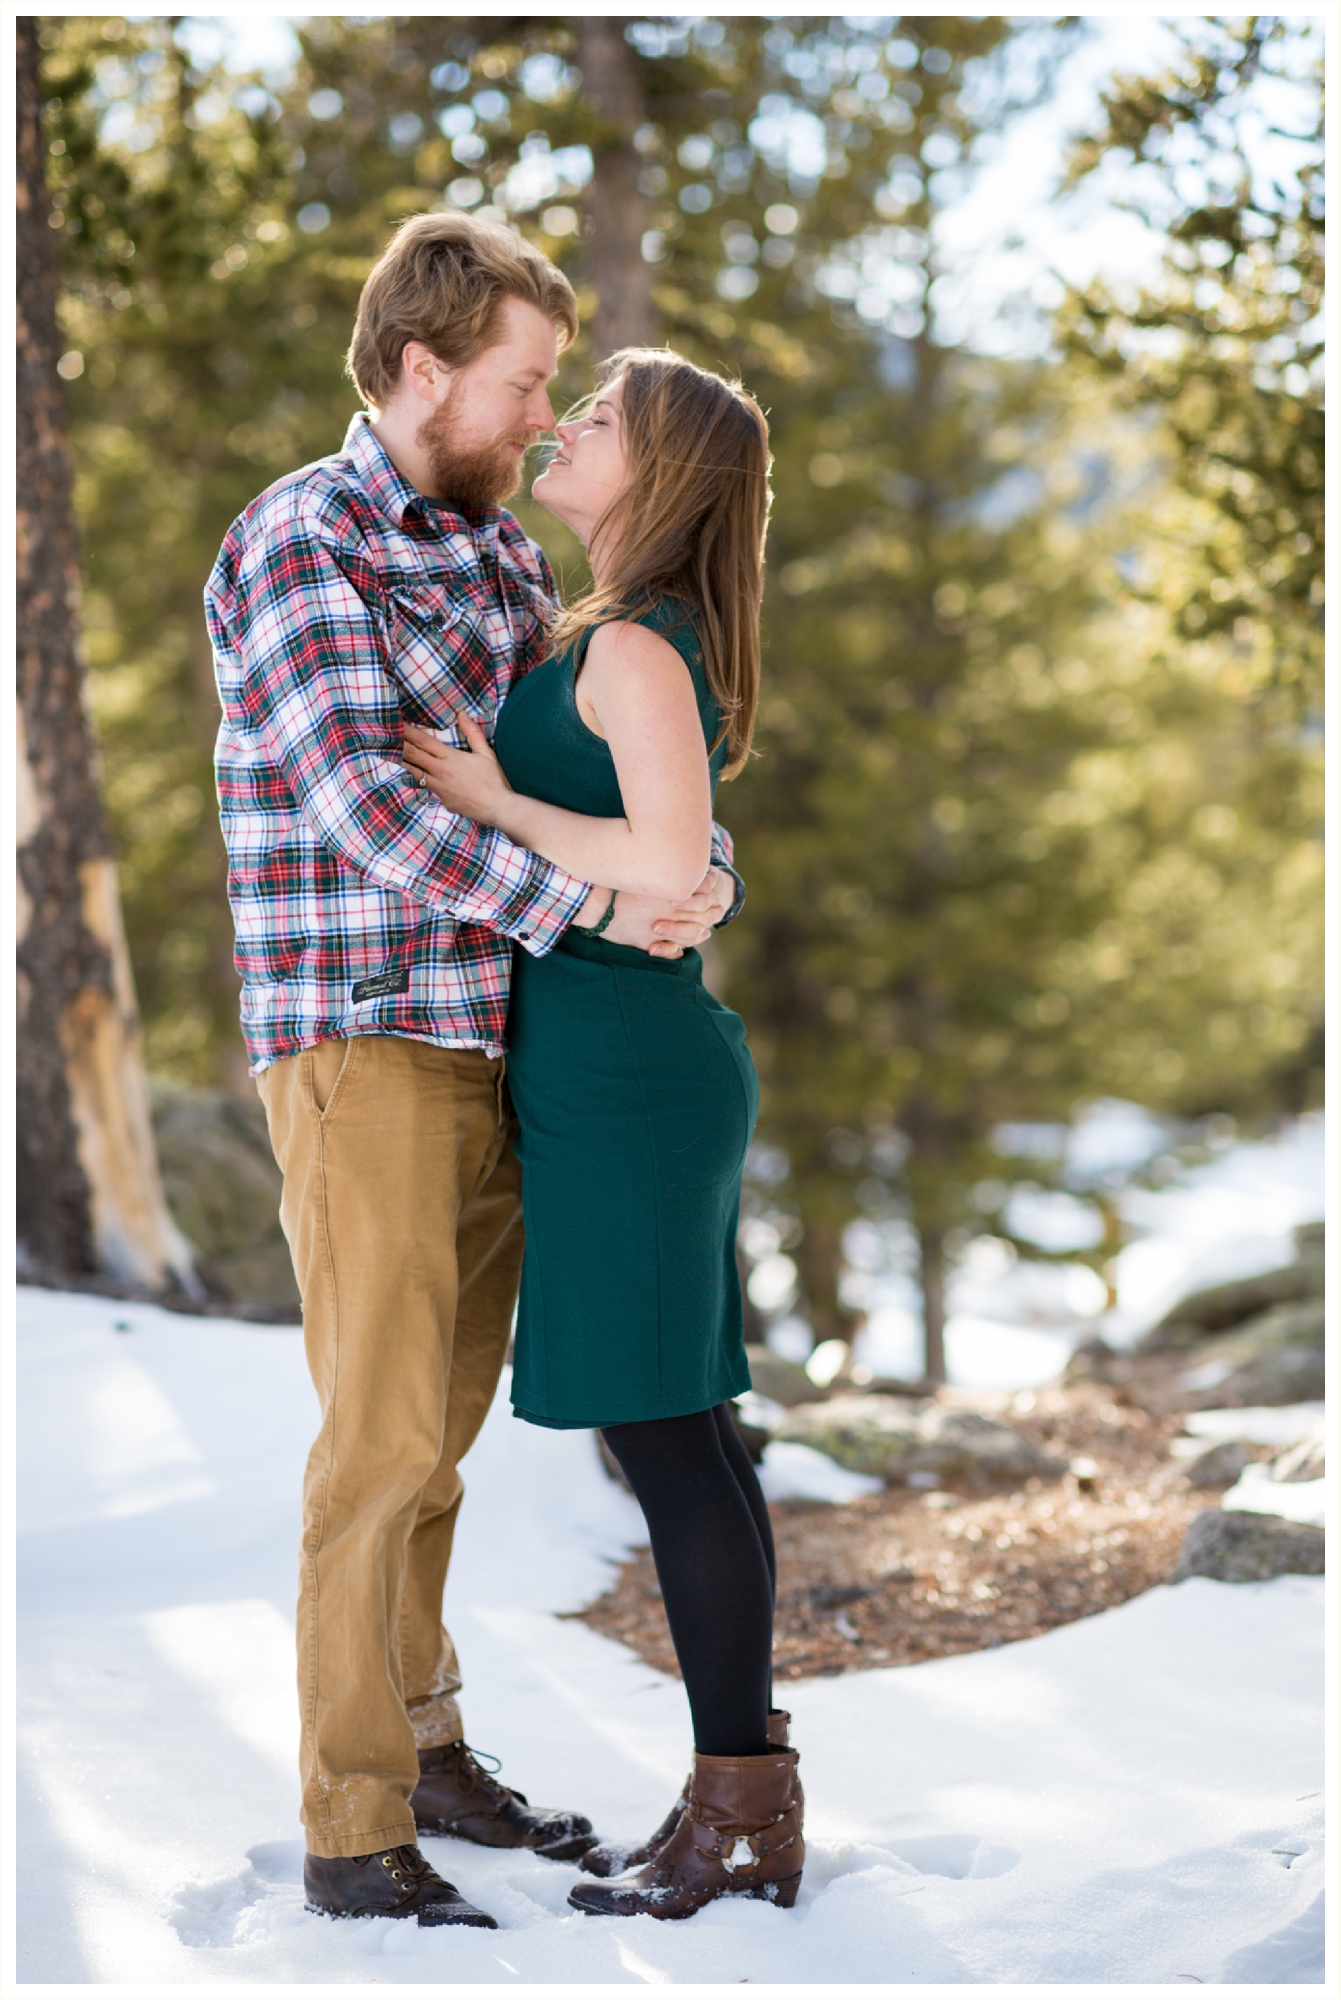 Echo Lake Park winter engagement session in the Colorado mountains. Colorado mountain wedding photographer. Colorado engagement photographer. natural candid Colorado engagement photography. Outdoor winter engagement photos in Colorado mountains. intimate almost kissing photo between couple. 